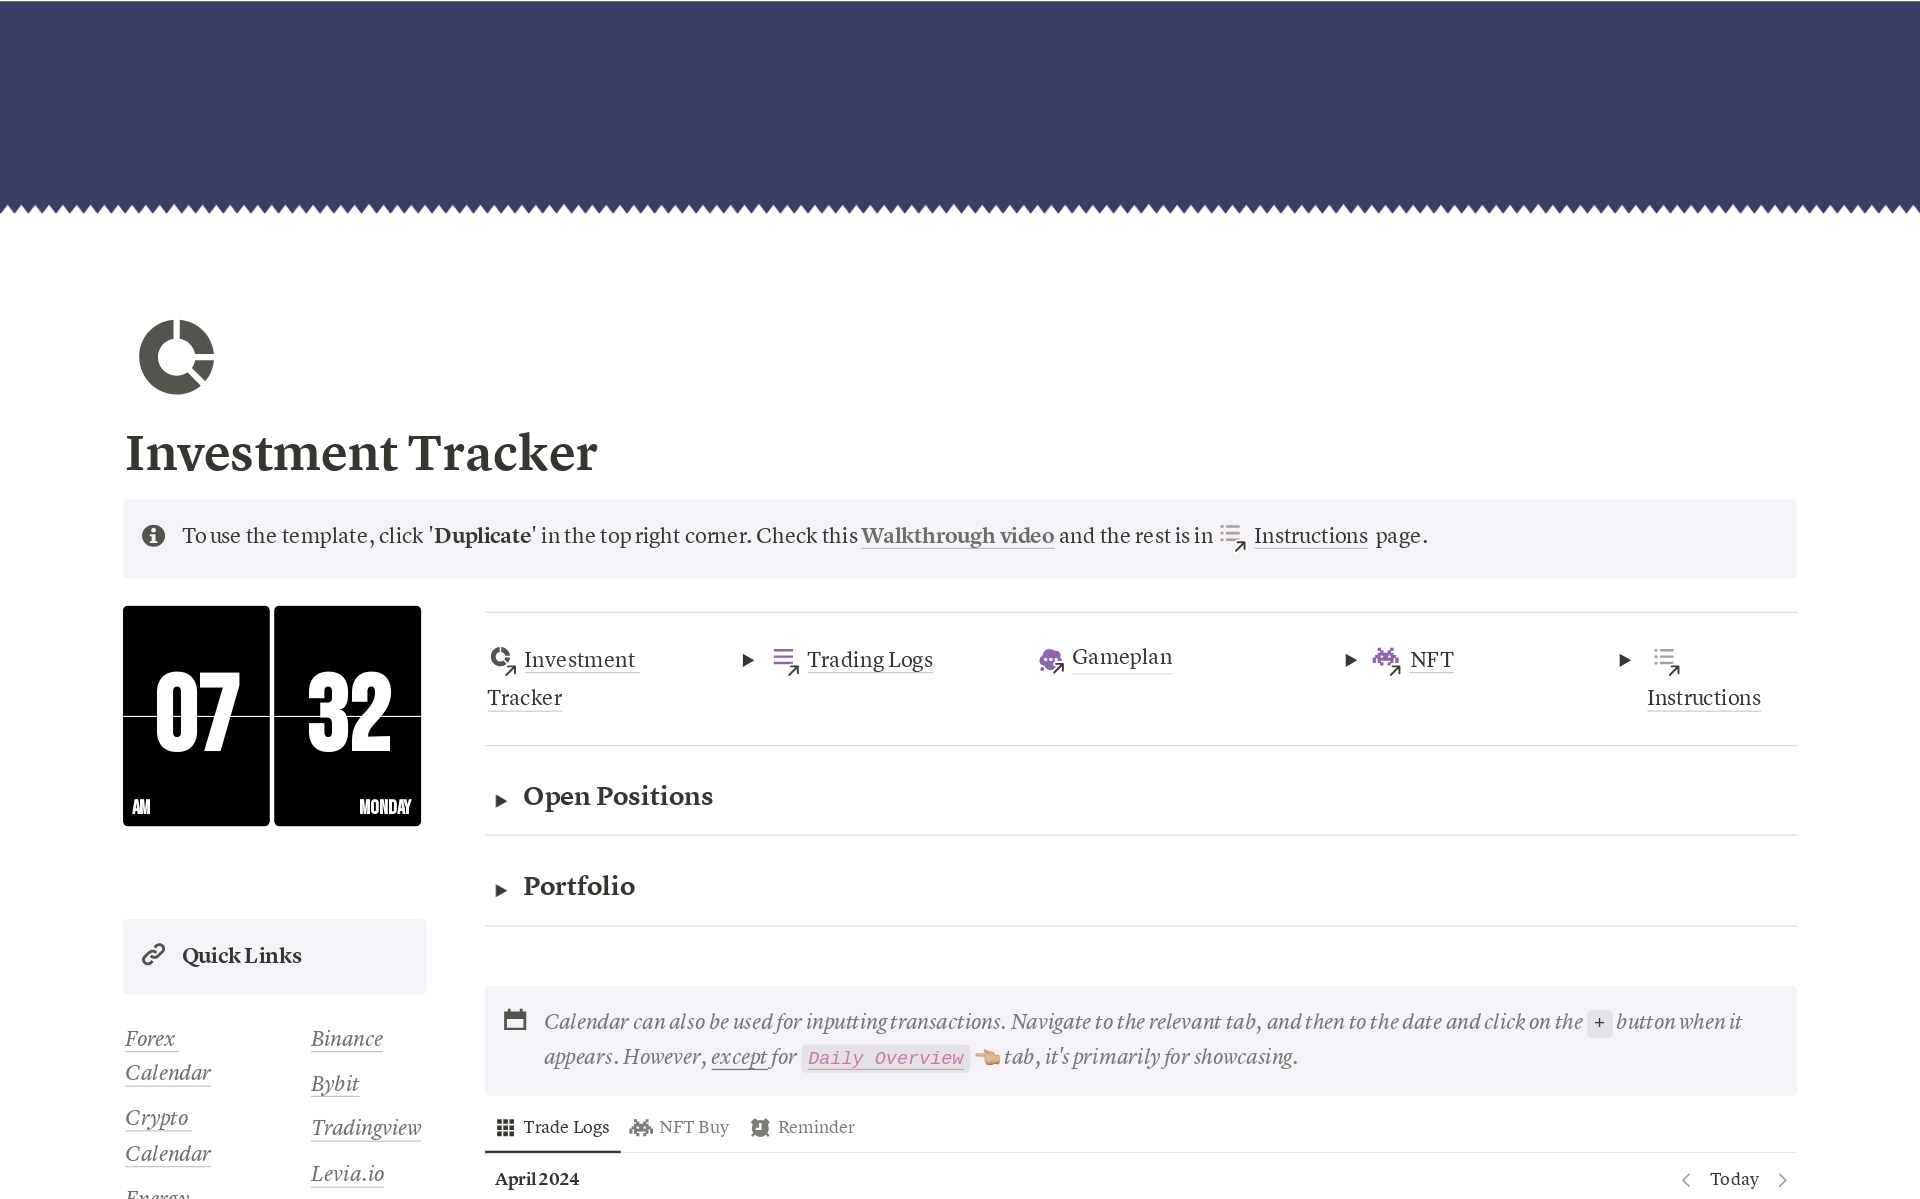 Track your investments / portfolio with this carefully created Notion template. Add your transactions, manage your positions, track your holdings with advanced Notion features. 
Bonus: NFT & Gem trackers.